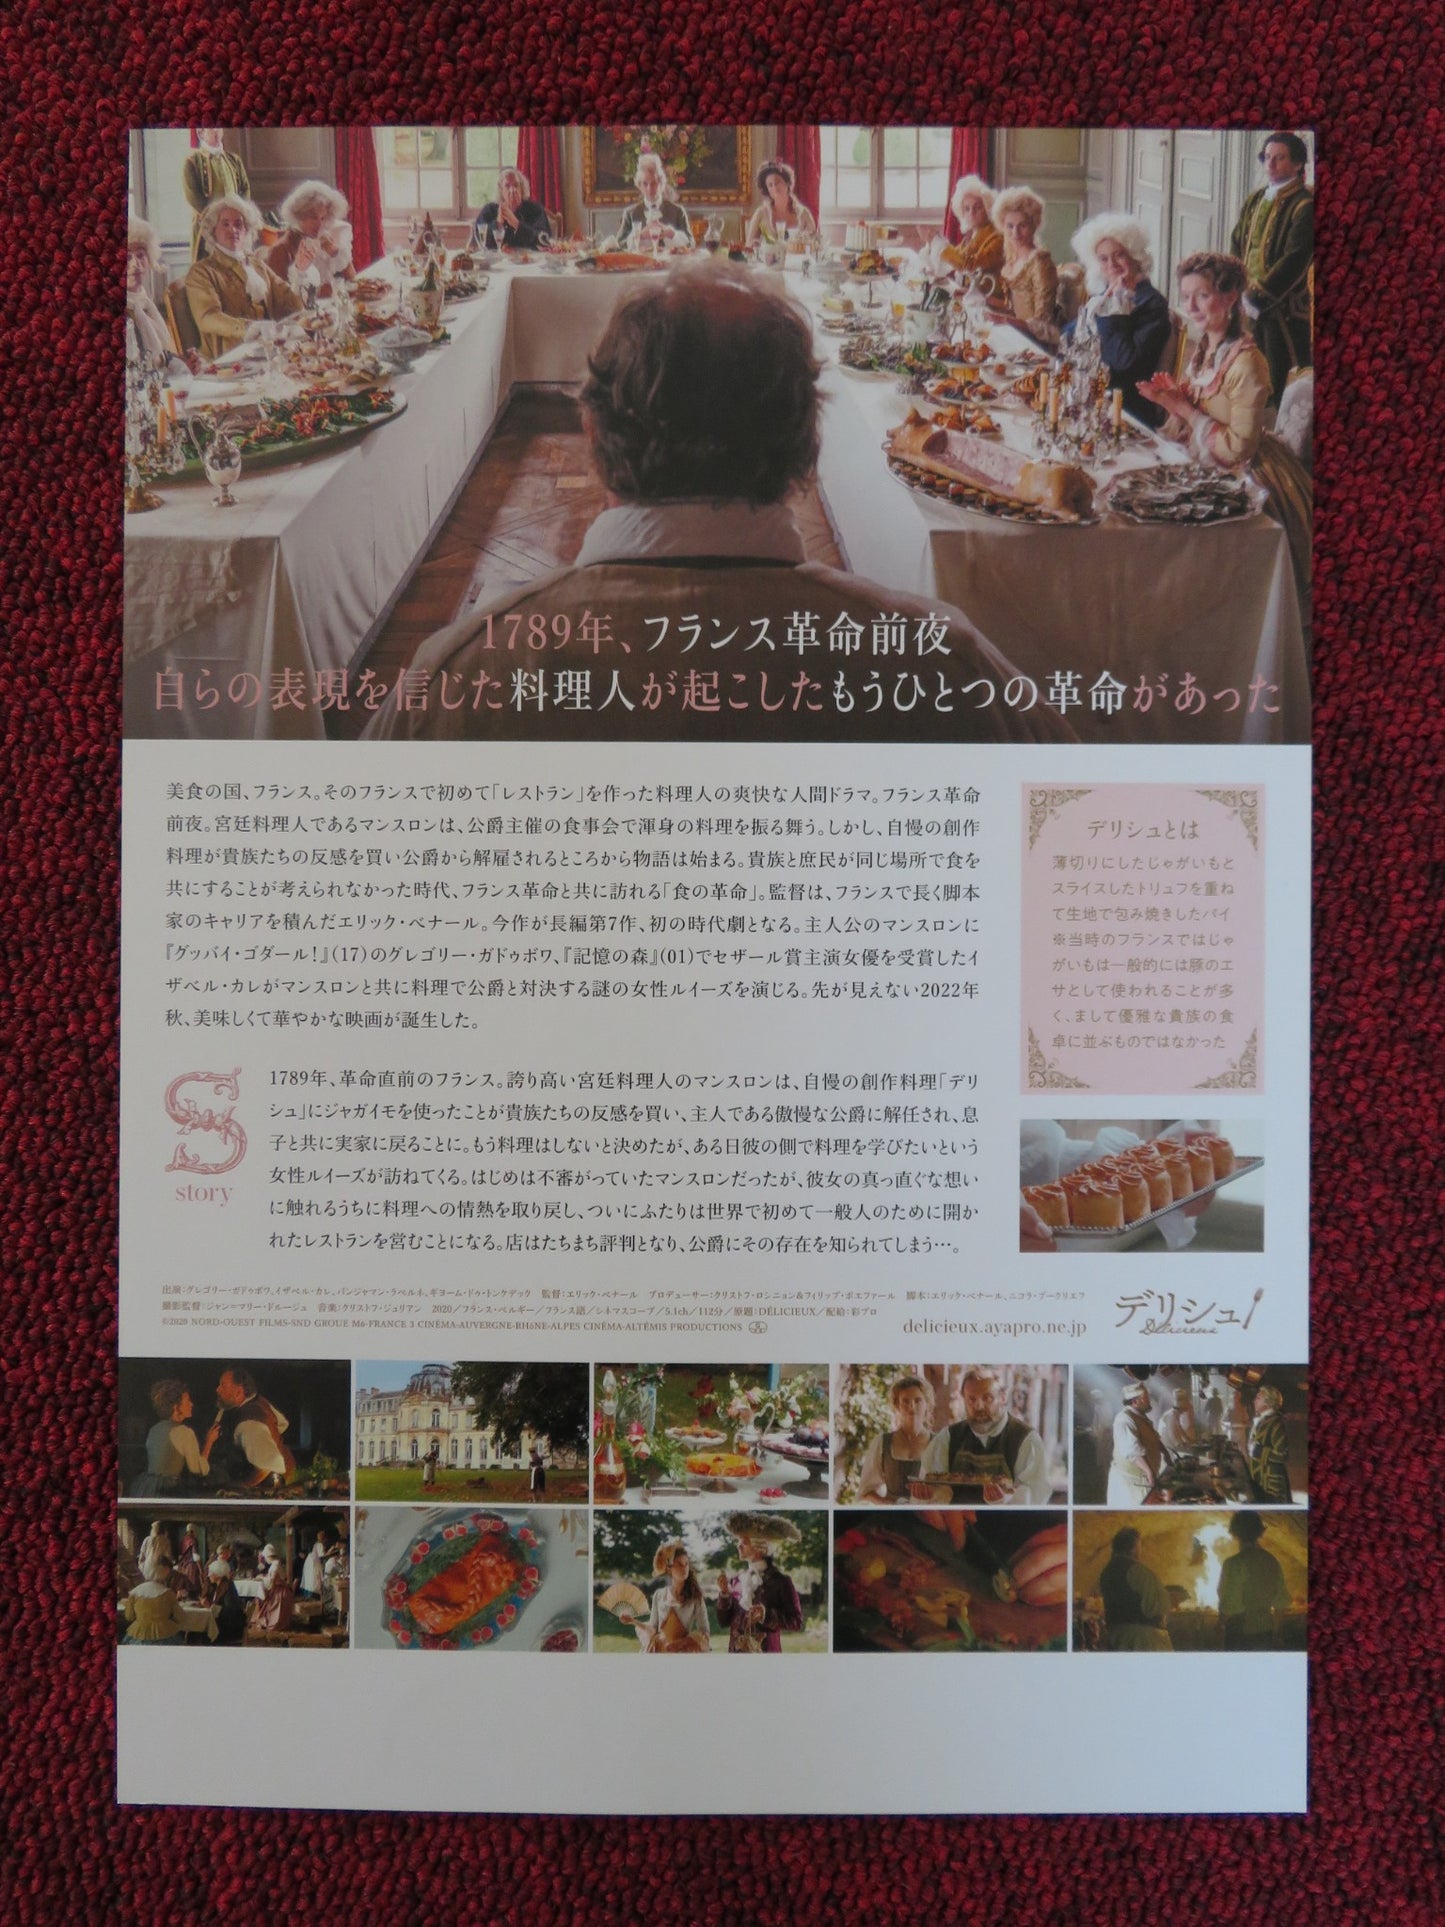 DELICIOUS JAPANESE CHIRASHI (B5) POSTER GREGORY GADEBOIS ISABELLE CARRE 2021